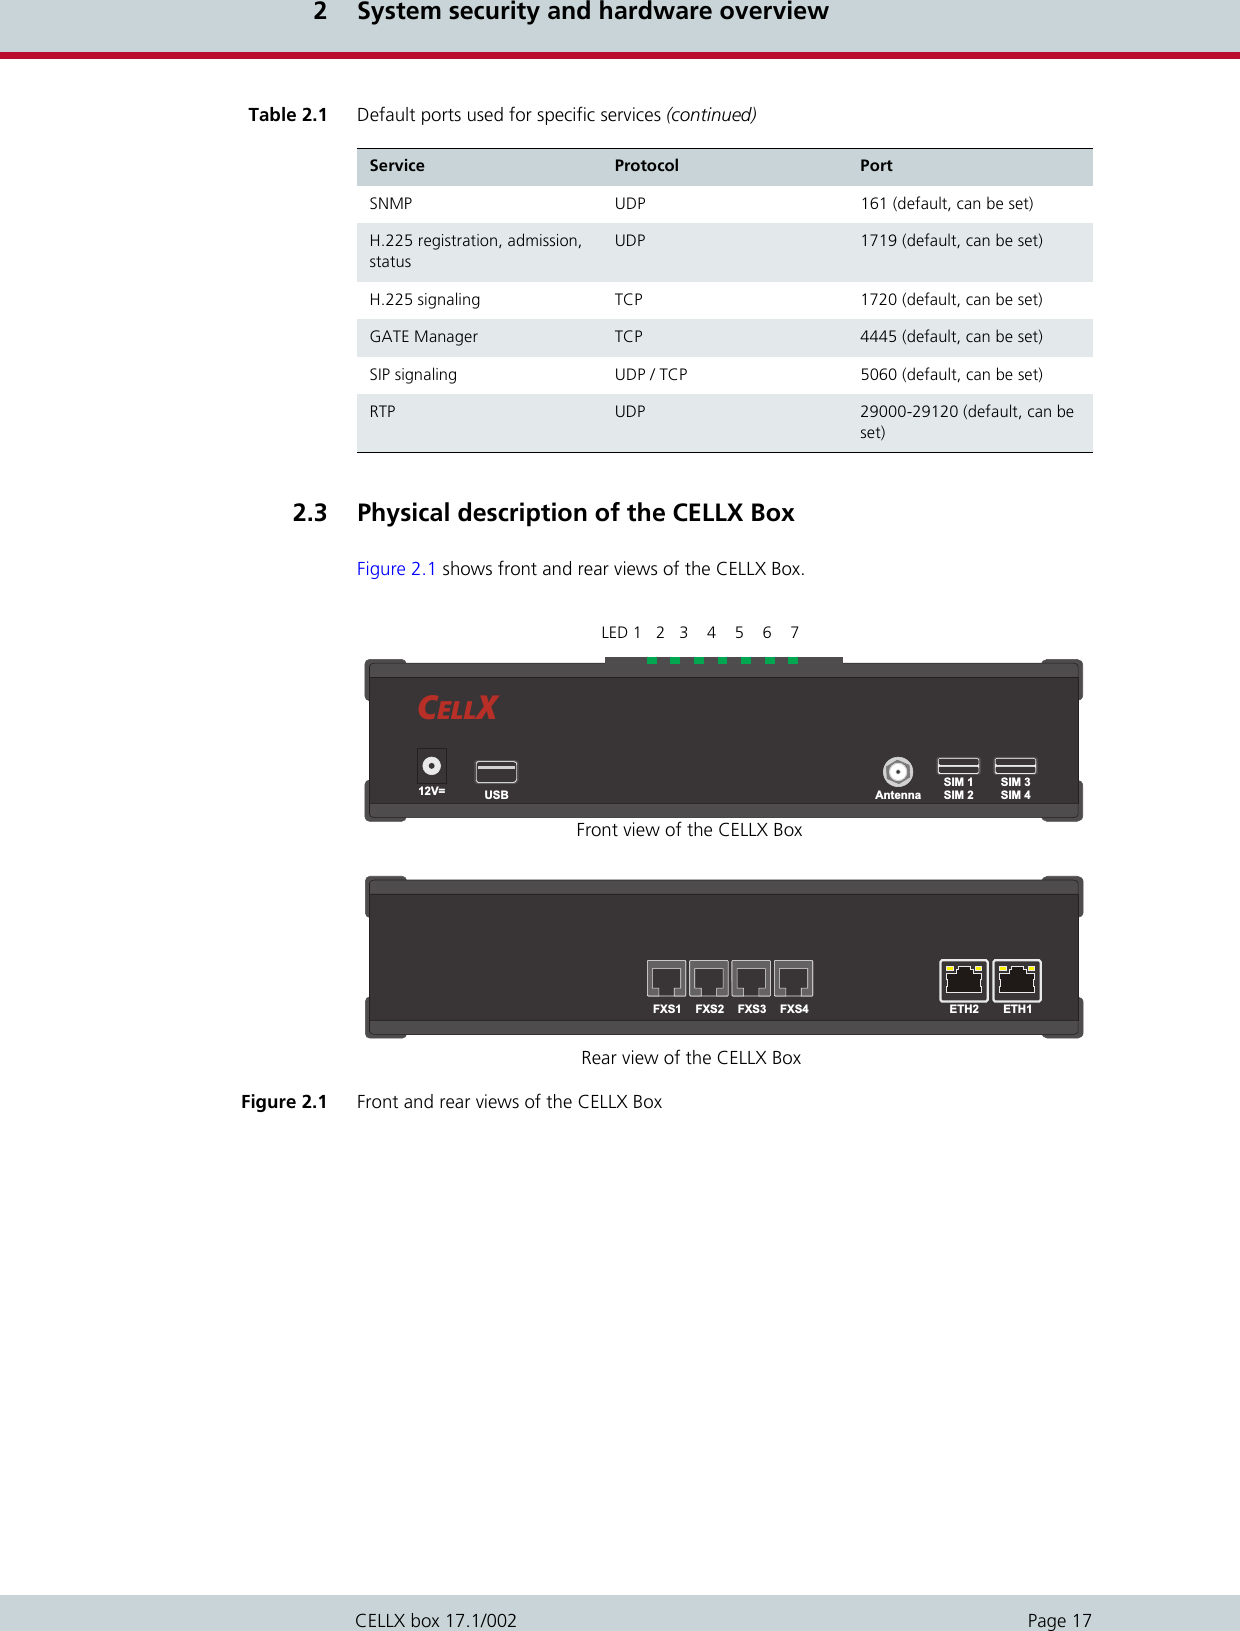 2 System security and hardware overviewPage 17CELLX box 17.1/0022.3  Physical description of the CELLX BoxFigure 2.1 shows front and rear views of the CELLX Box. Figure 2.1 Front and rear views of the CELLX BoxSNMP UDP 161 (default, can be set)H.225 registration, admission, statusUDP 1719 (default, can be set)H.225 signaling TCP 1720 (default, can be set)GATE Manager TCP 4445 (default, can be set)SIP signaling UDP / TCP 5060 (default, can be set)RTP UDP 29000-29120 (default, can be set)Table 2.1 Default ports used for specific services (continued)Service Protocol PortETH1ETH2FXS1 FXS2 FXS3 FXS4AntennaUSB12V=CXELLSIM 1SIM 2SIM 3SIM 4Front view of the CELLX BoxRear view of the CELLX BoxLED 1234567